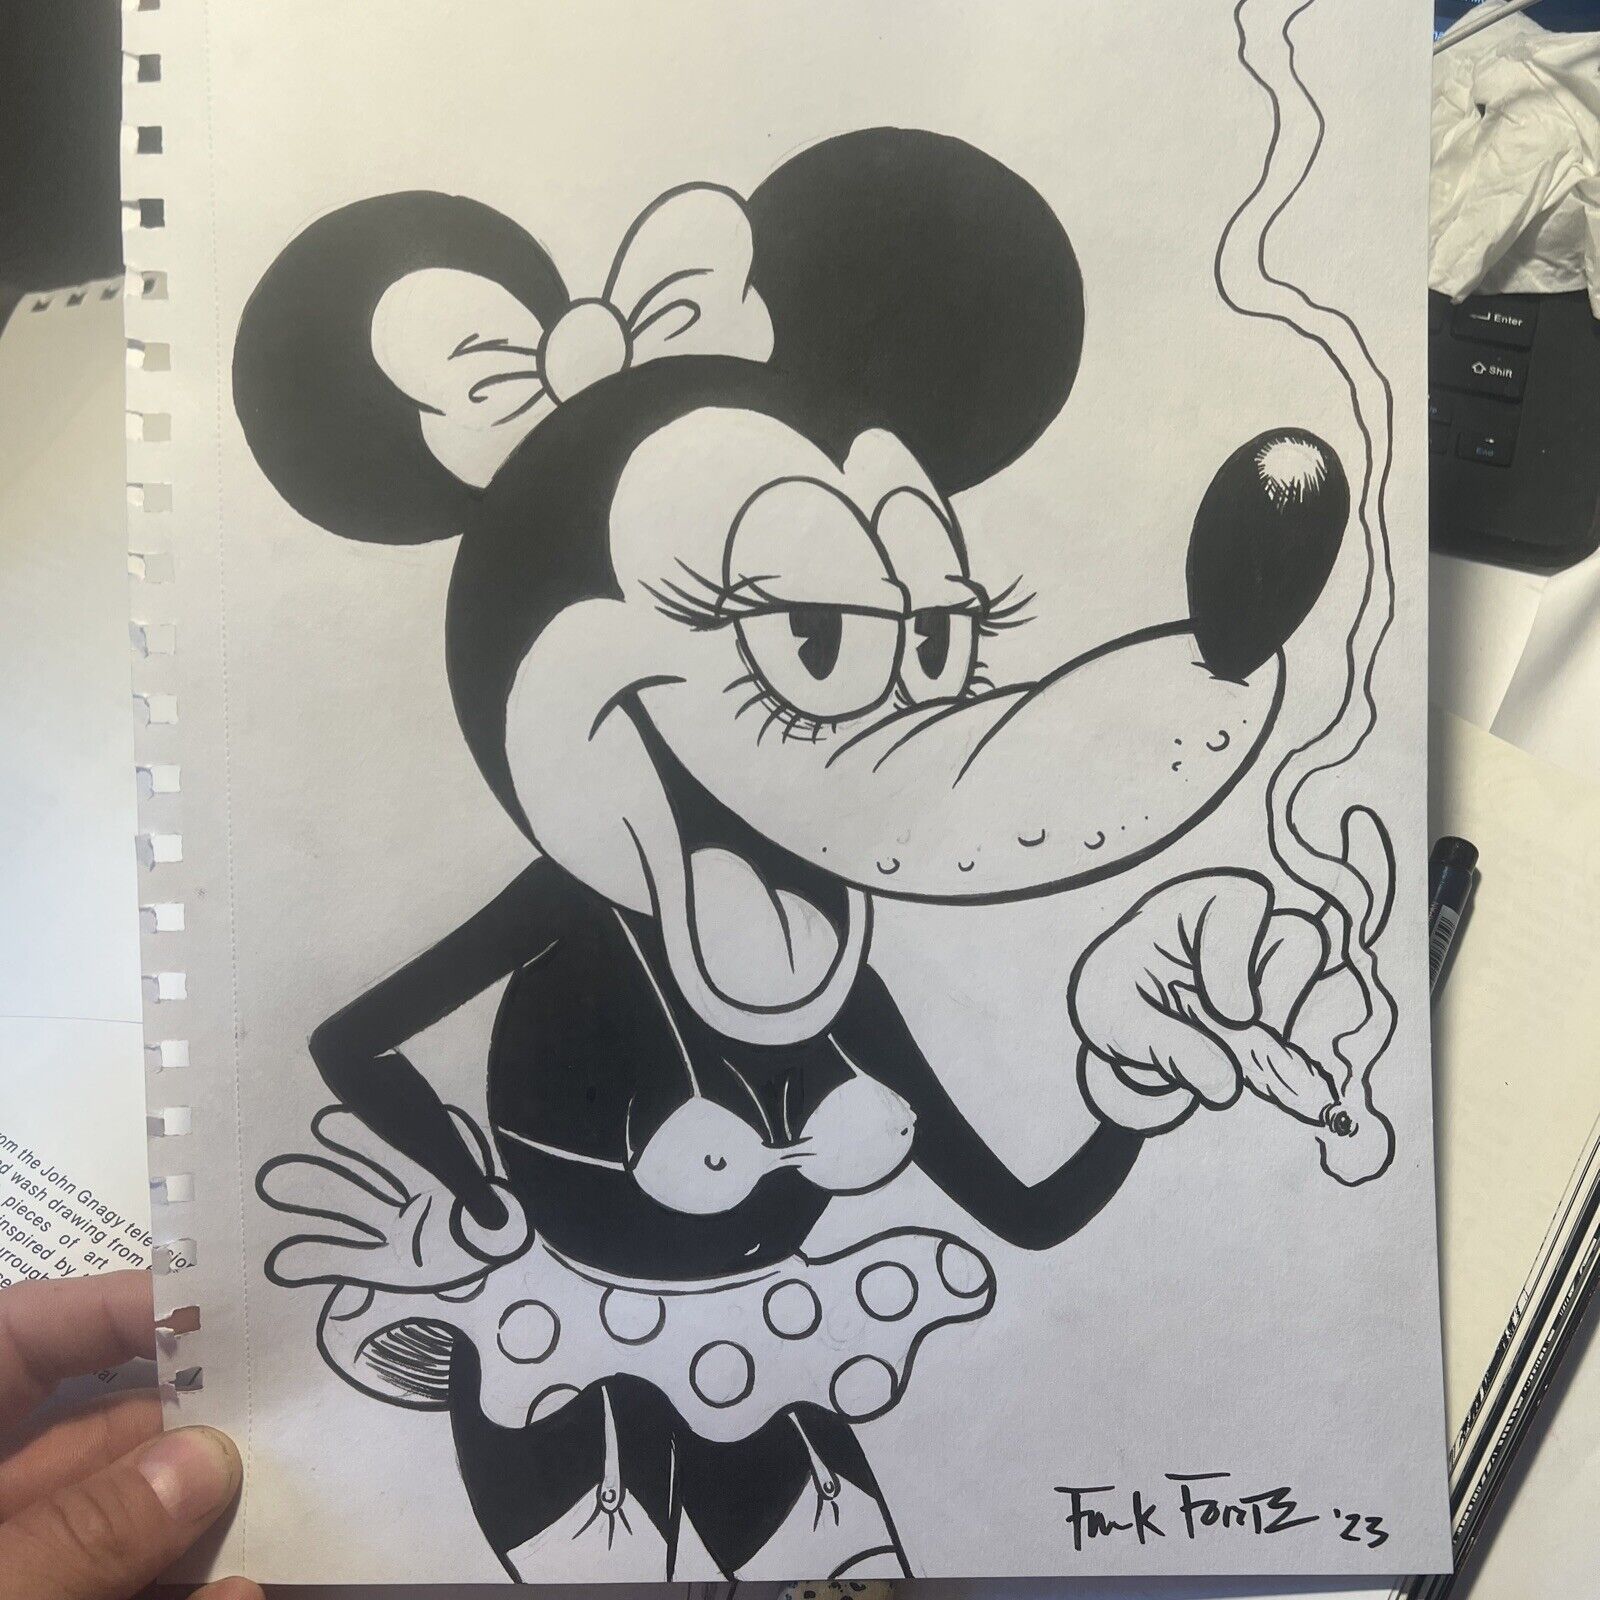 Minnie Mouse With Cigarette Pop Surrealism Original Art drawing By Frank Forte